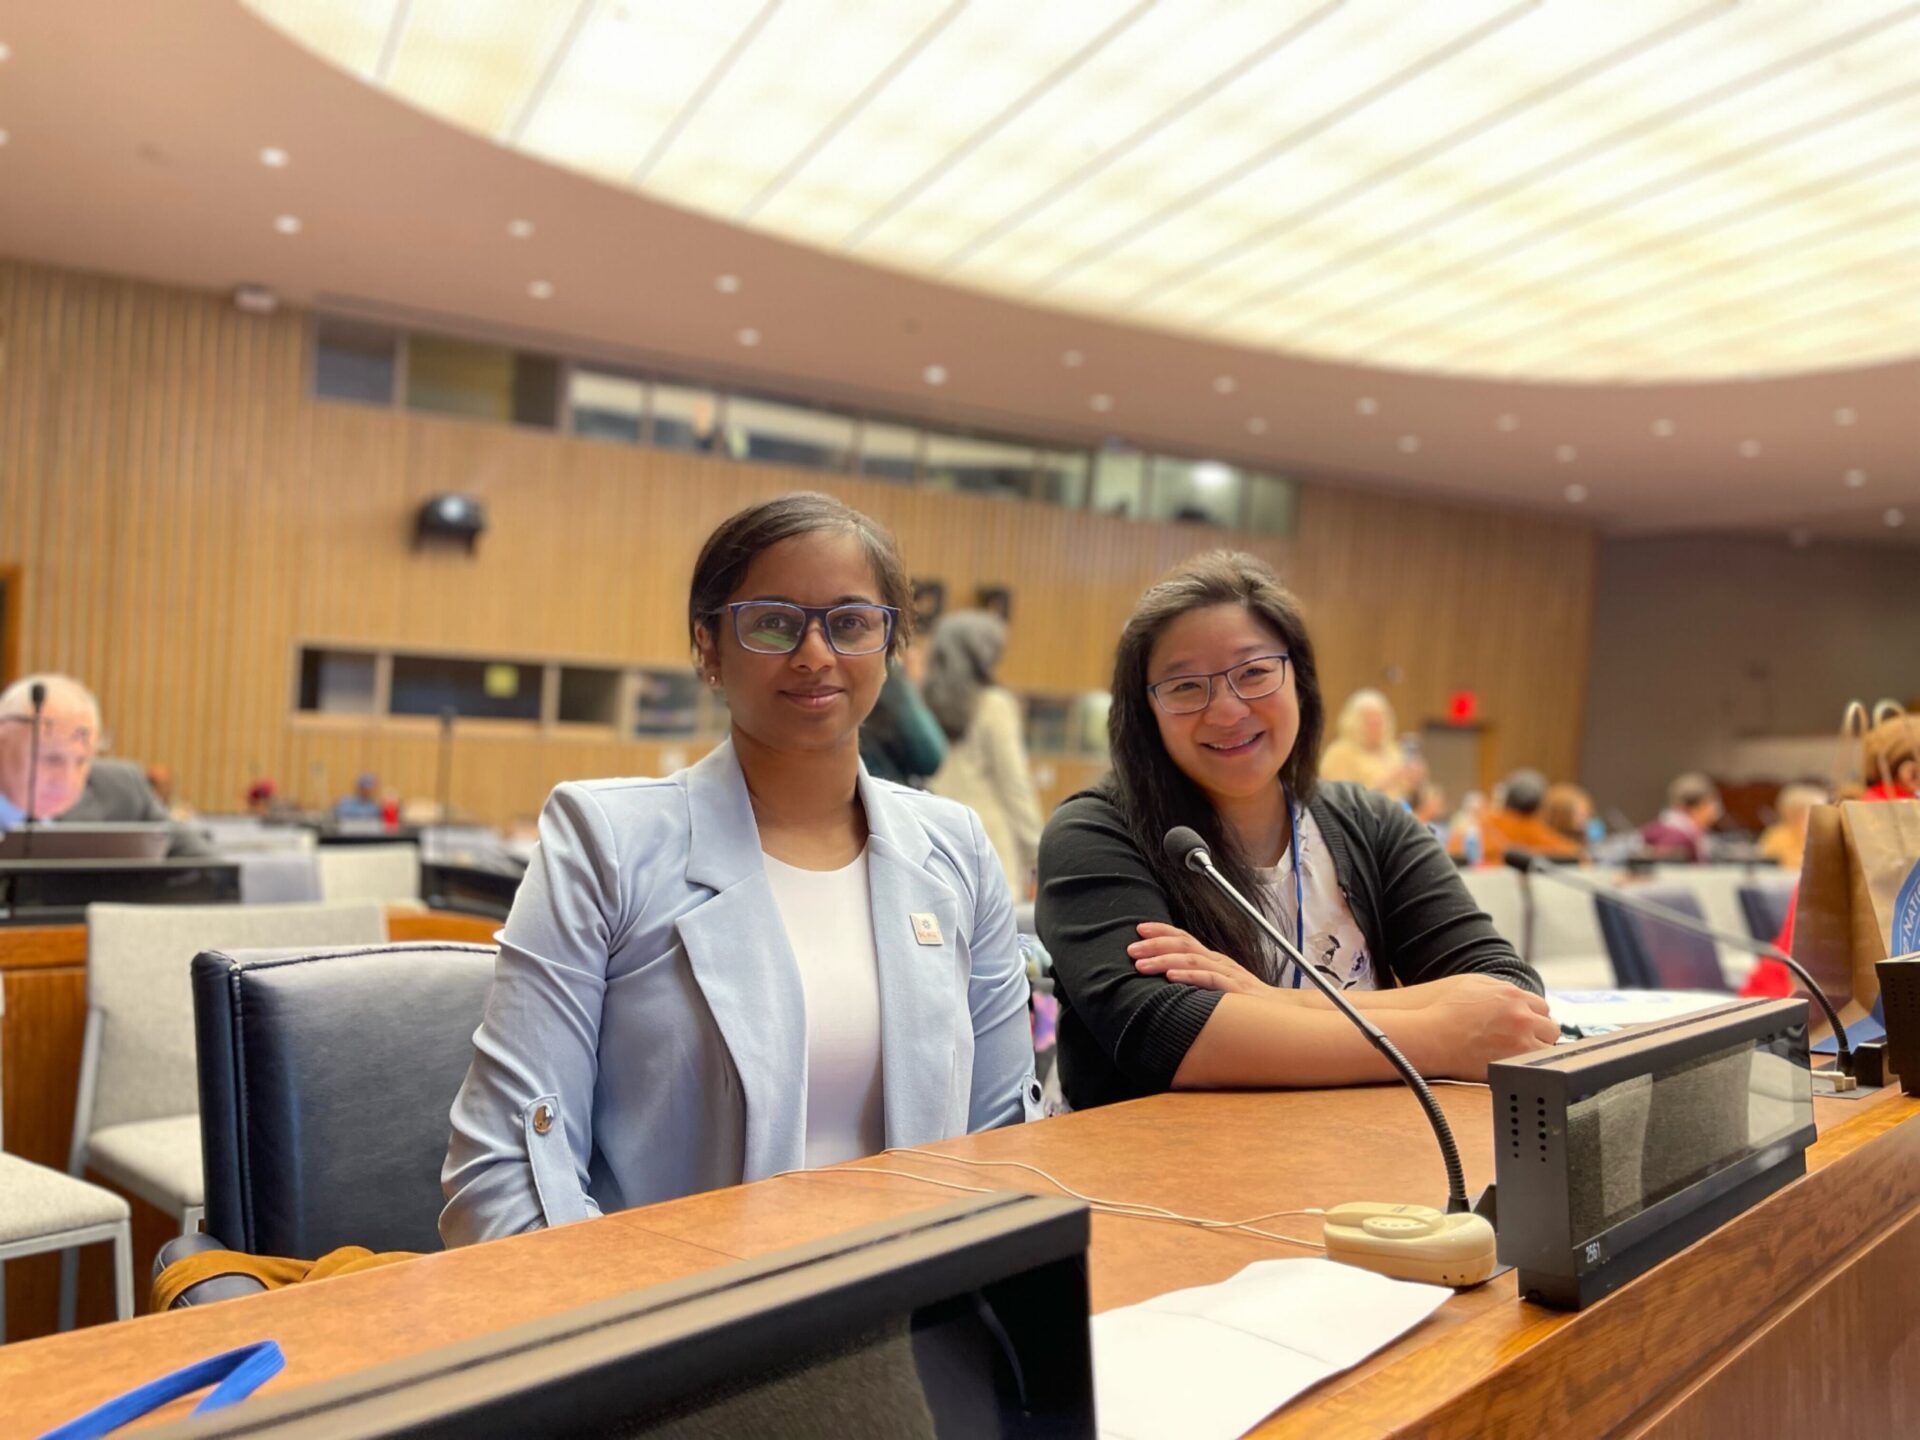 Dr. Melanie Ratnam and Dr. Poh Tan at the United Nations Headquarters in New York for CSW67.